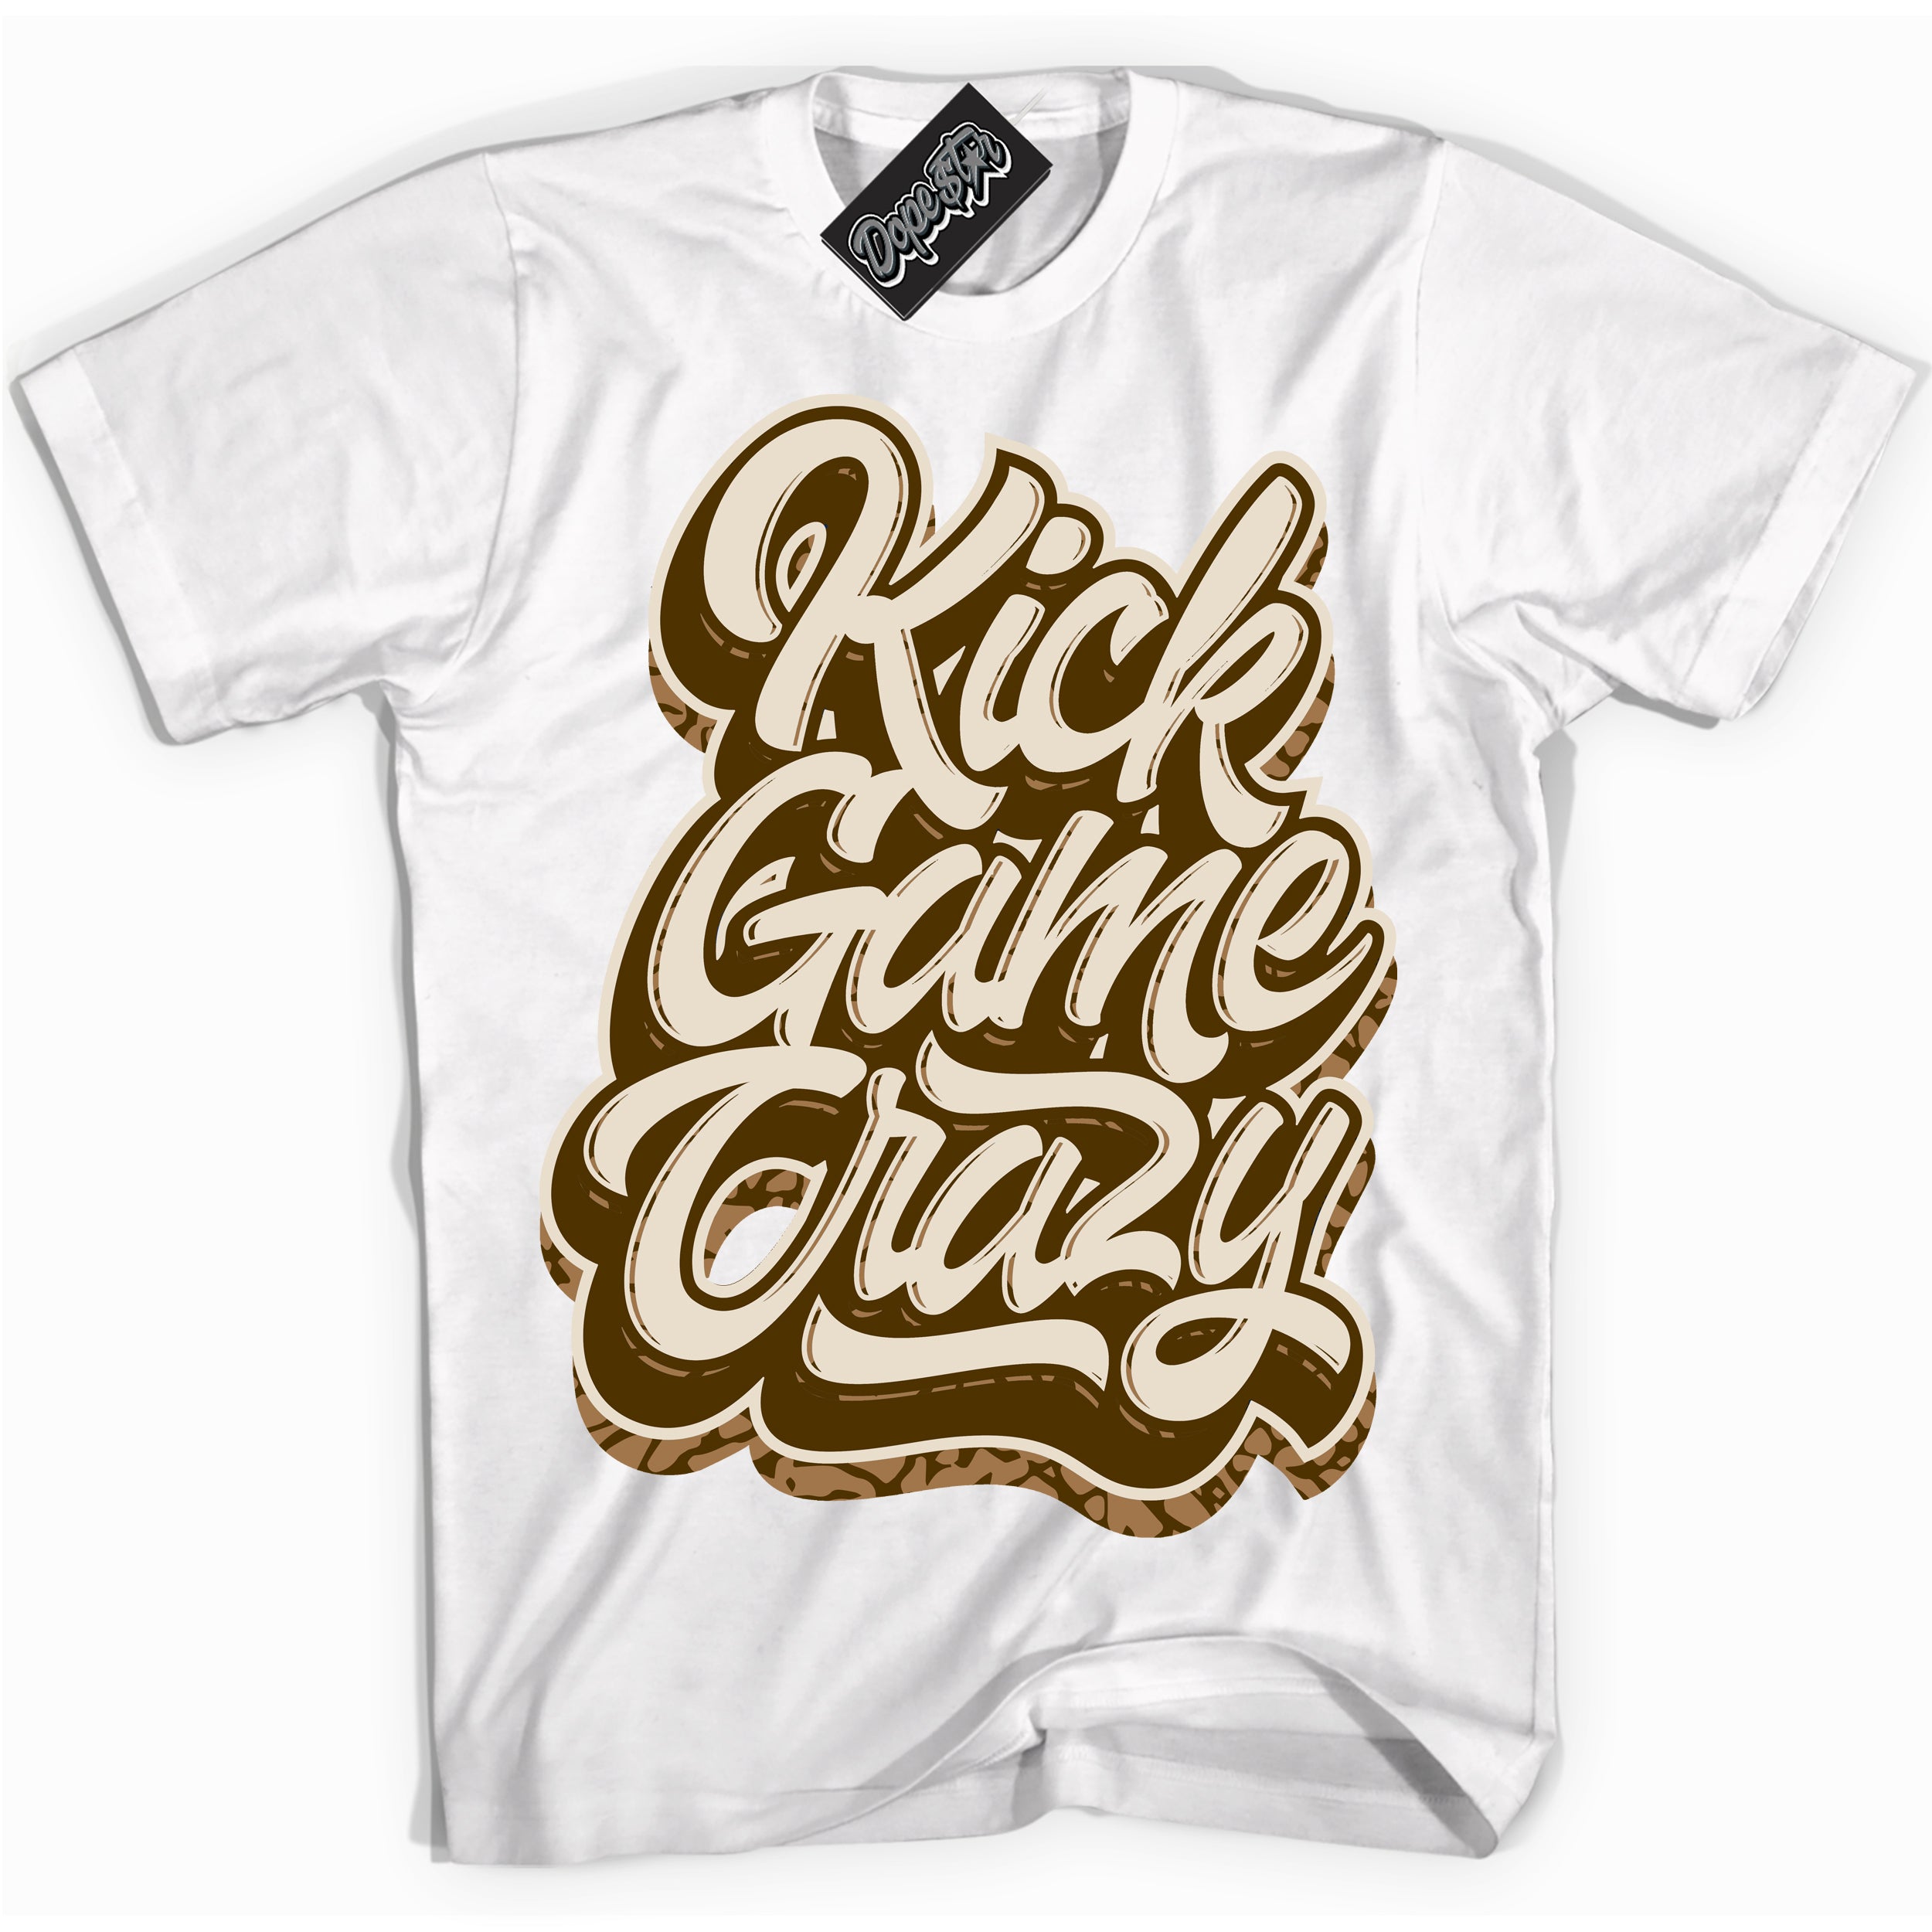 Cool White graphic tee with “ Kick Game Crazy ” design, that perfectly matches Palomino 3s sneakers 